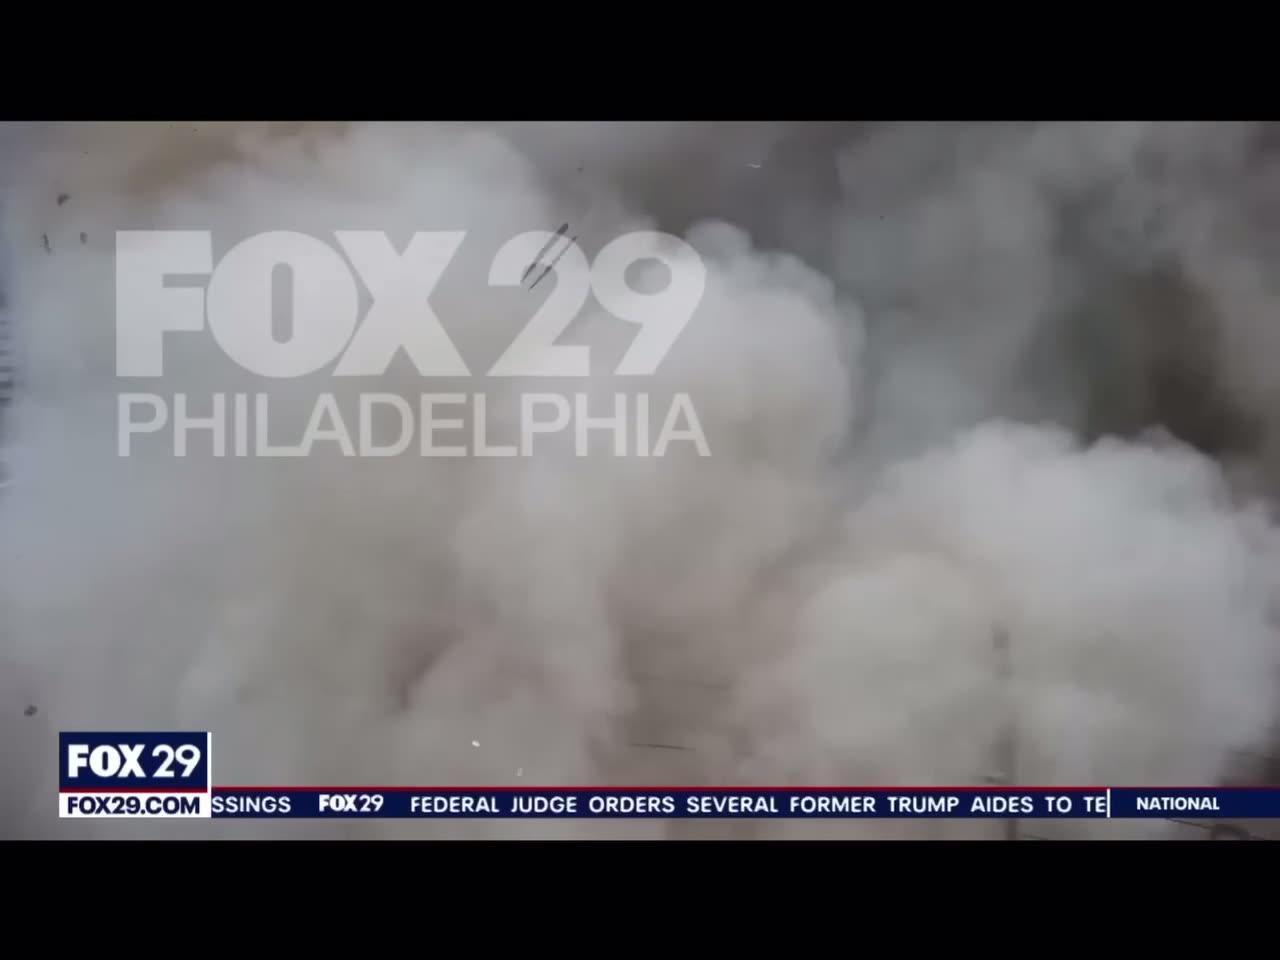 Pennsylvania / Explosion at a Reading PA chocolate factory 2 dead 9 missing